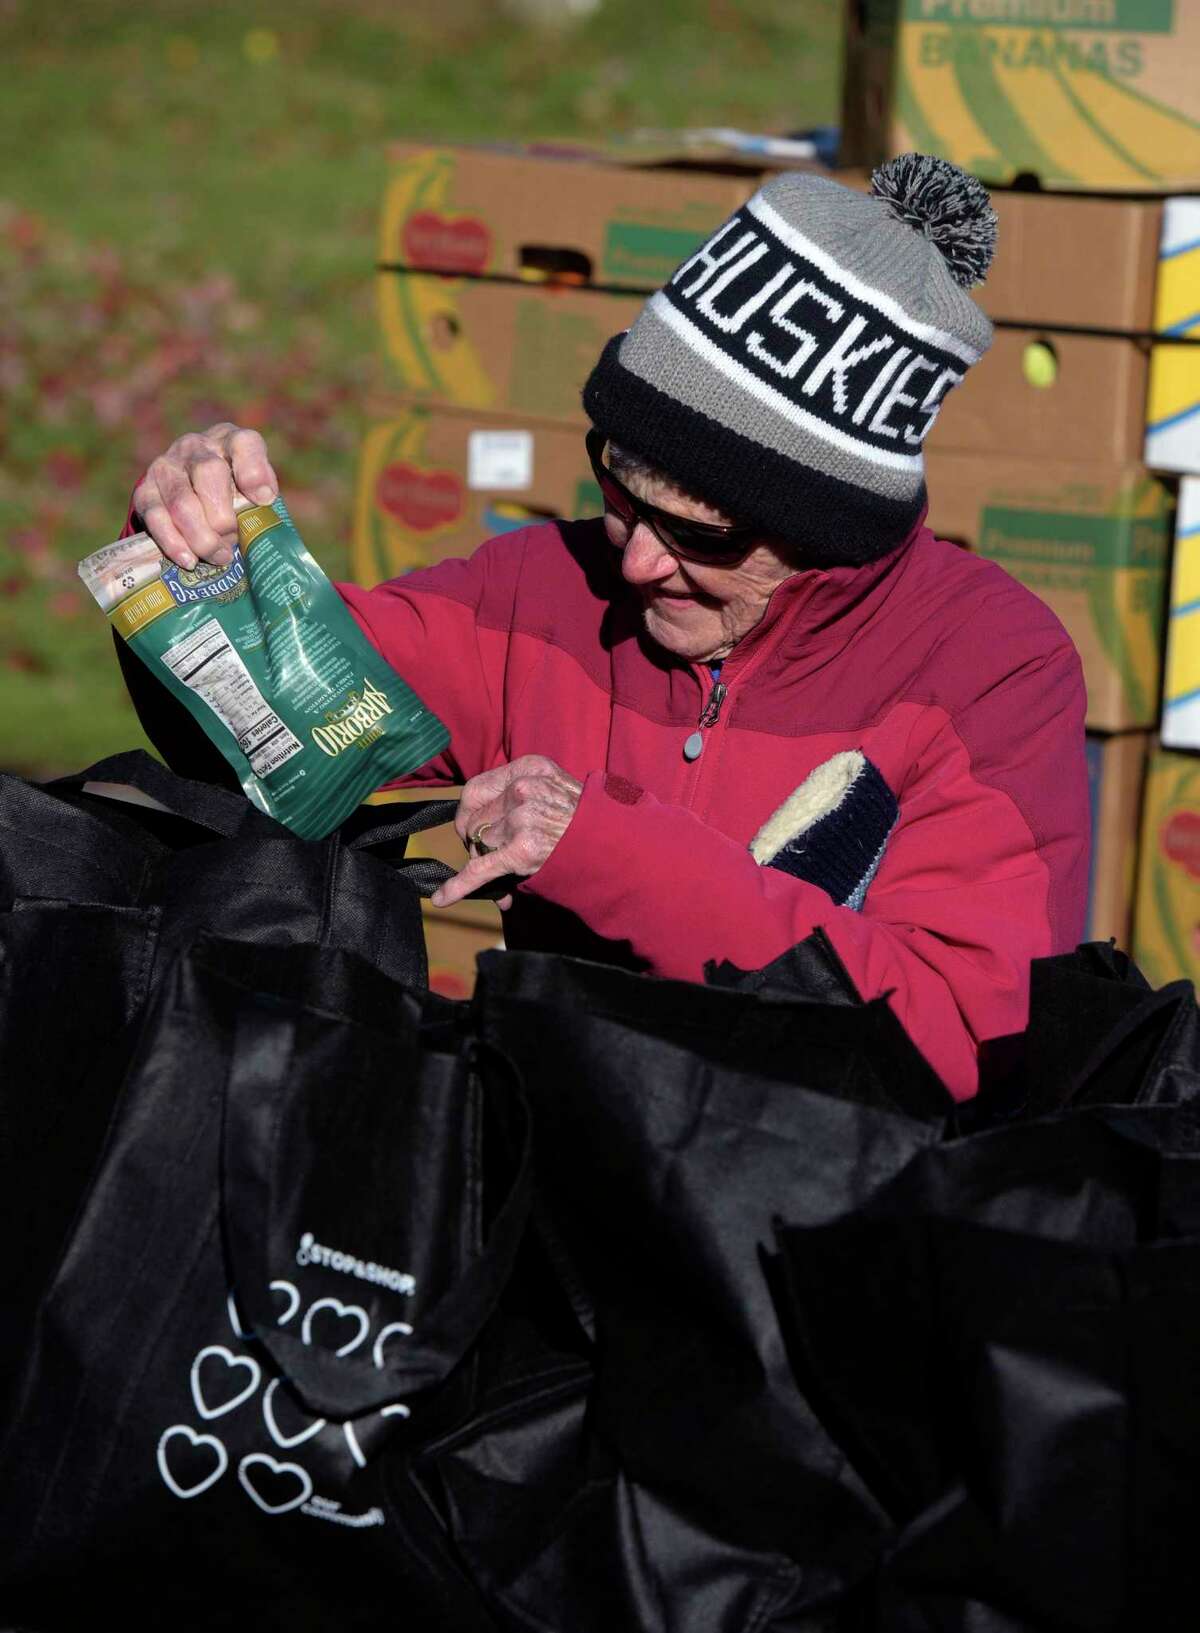 Volunteer Becky Strominger, of Ridgefield, packs bags of food at St. Andrew's Church on Friday morning. Food delivered by CT Foodshare was distributed by Ridgefield Social Services on Friday morning, November 19, 2021, Ridgefield, Conn.